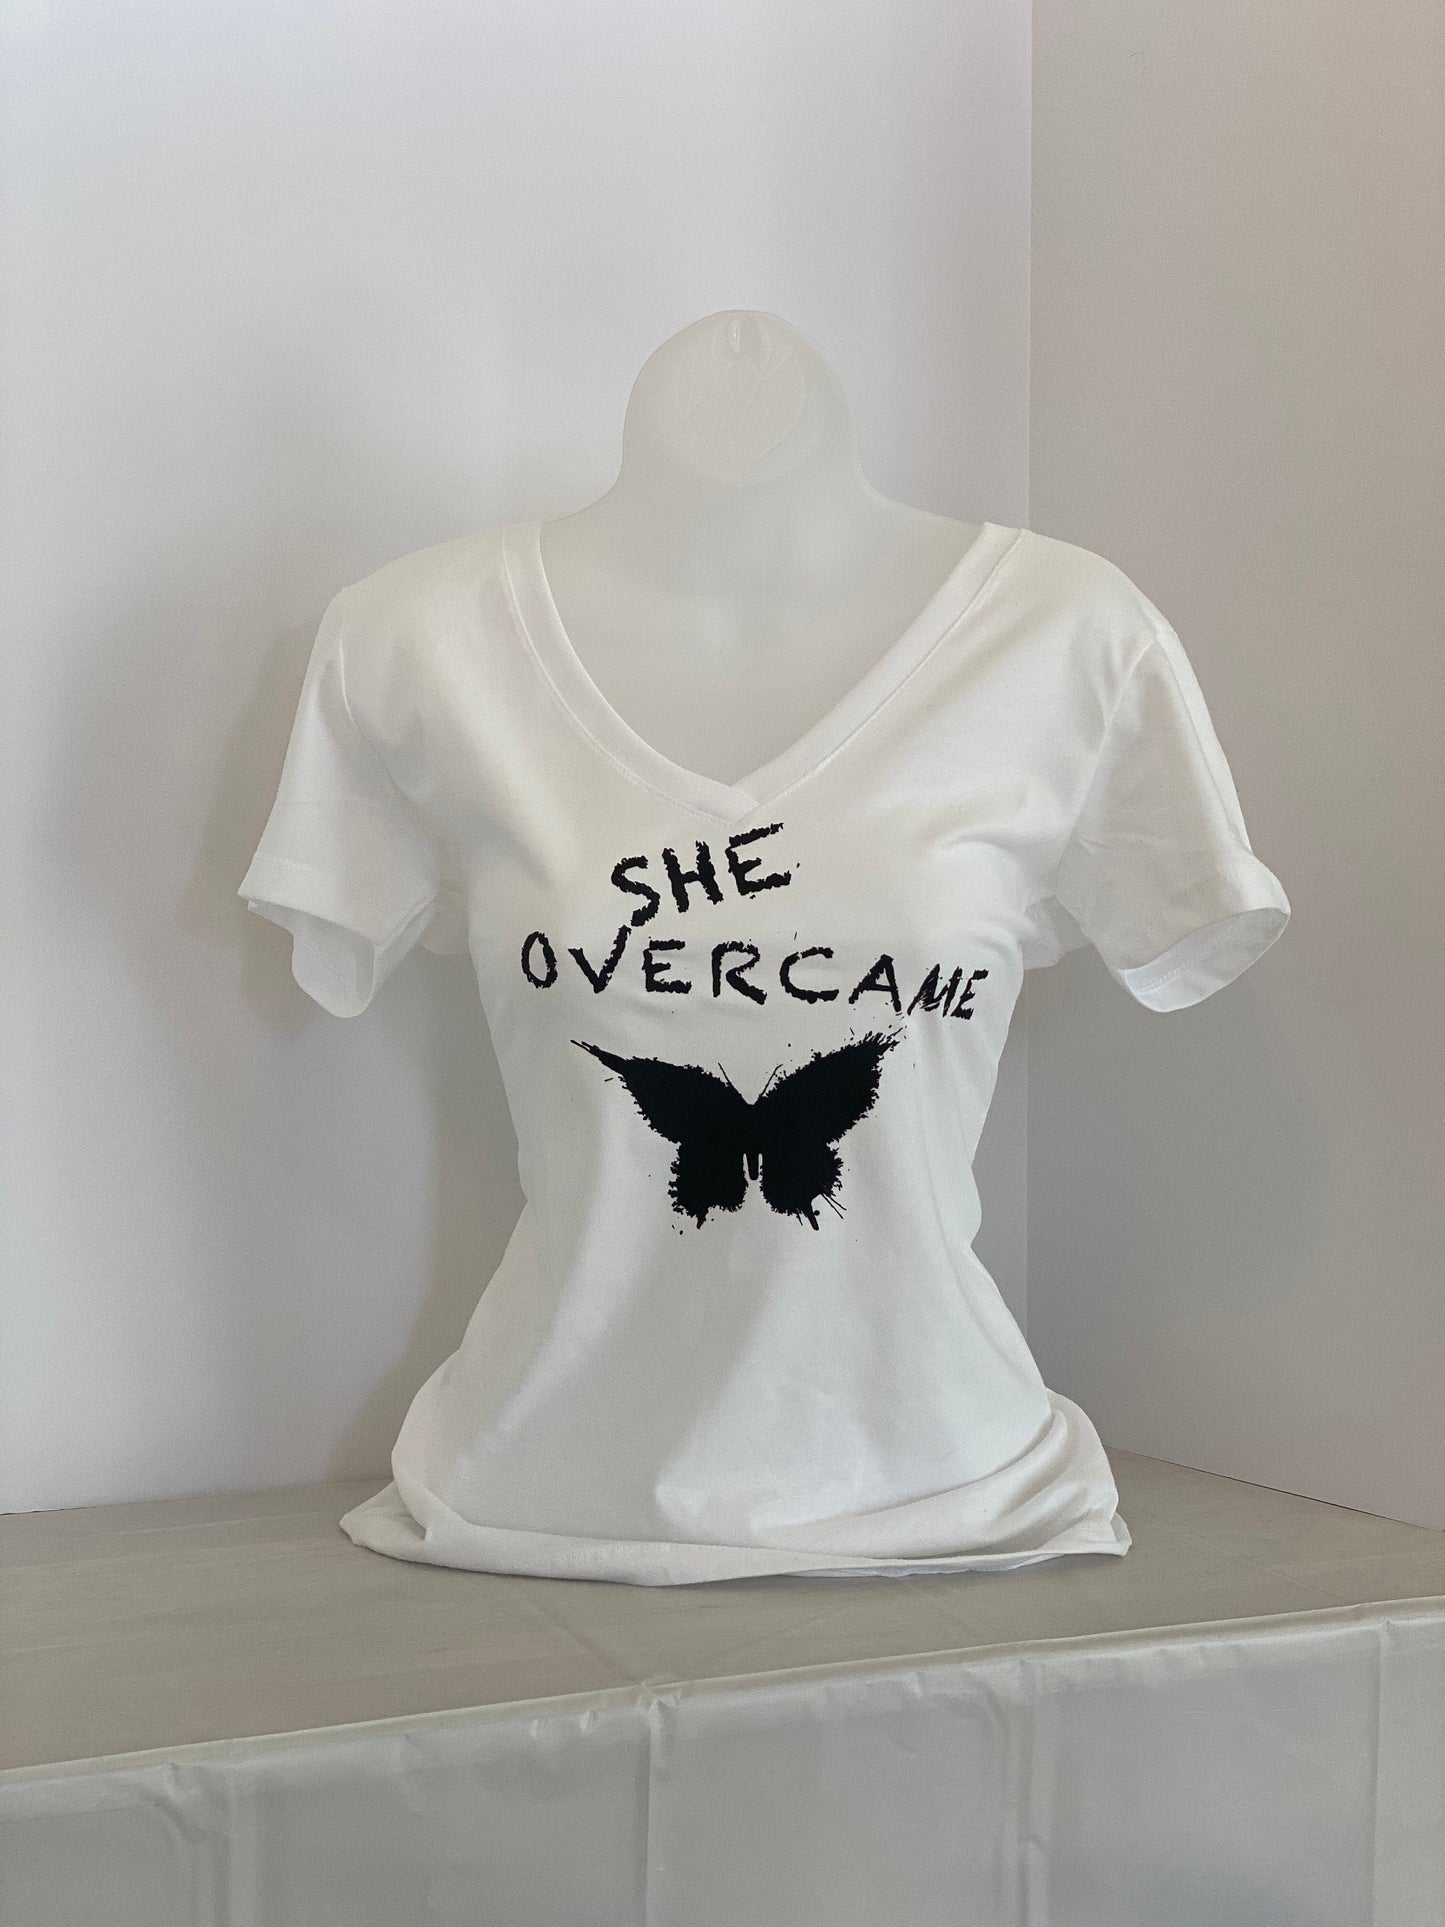 She Overcame T-Shirt, Tank, Hoodie, or Tote, Strong Woman Shirt, Empowerment Hoodie, Inspirational Gift